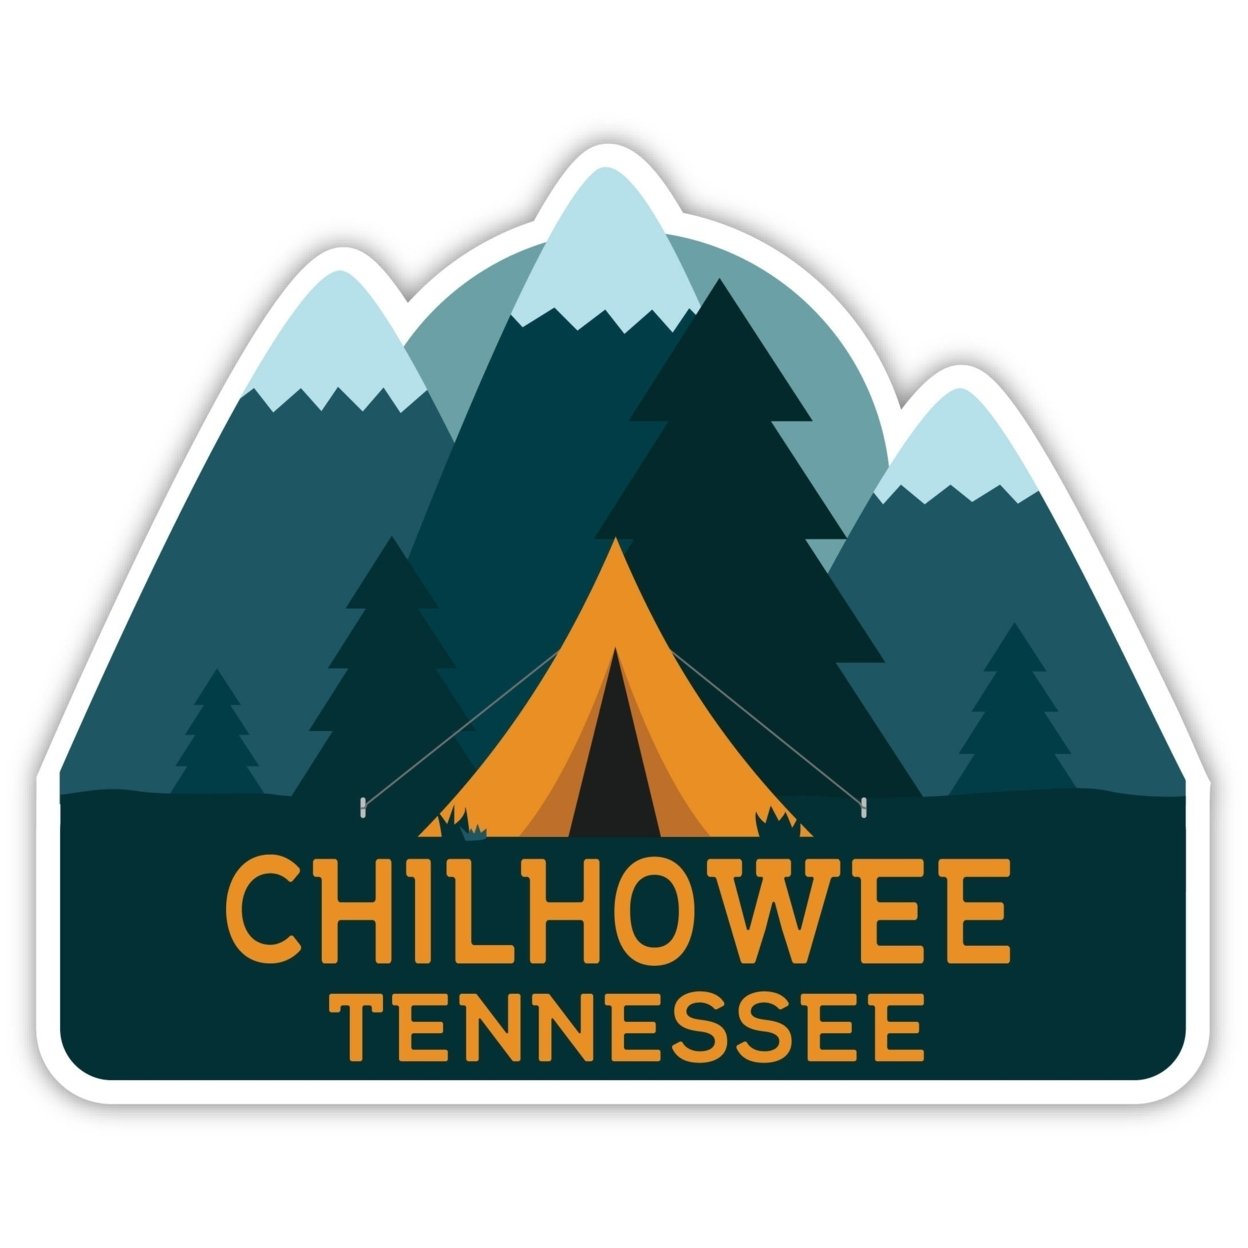 Chilhowee Tennessee Souvenir Decorative Stickers (Choose Theme And Size) - 4-Pack, 2-Inch, Adventures Awaits